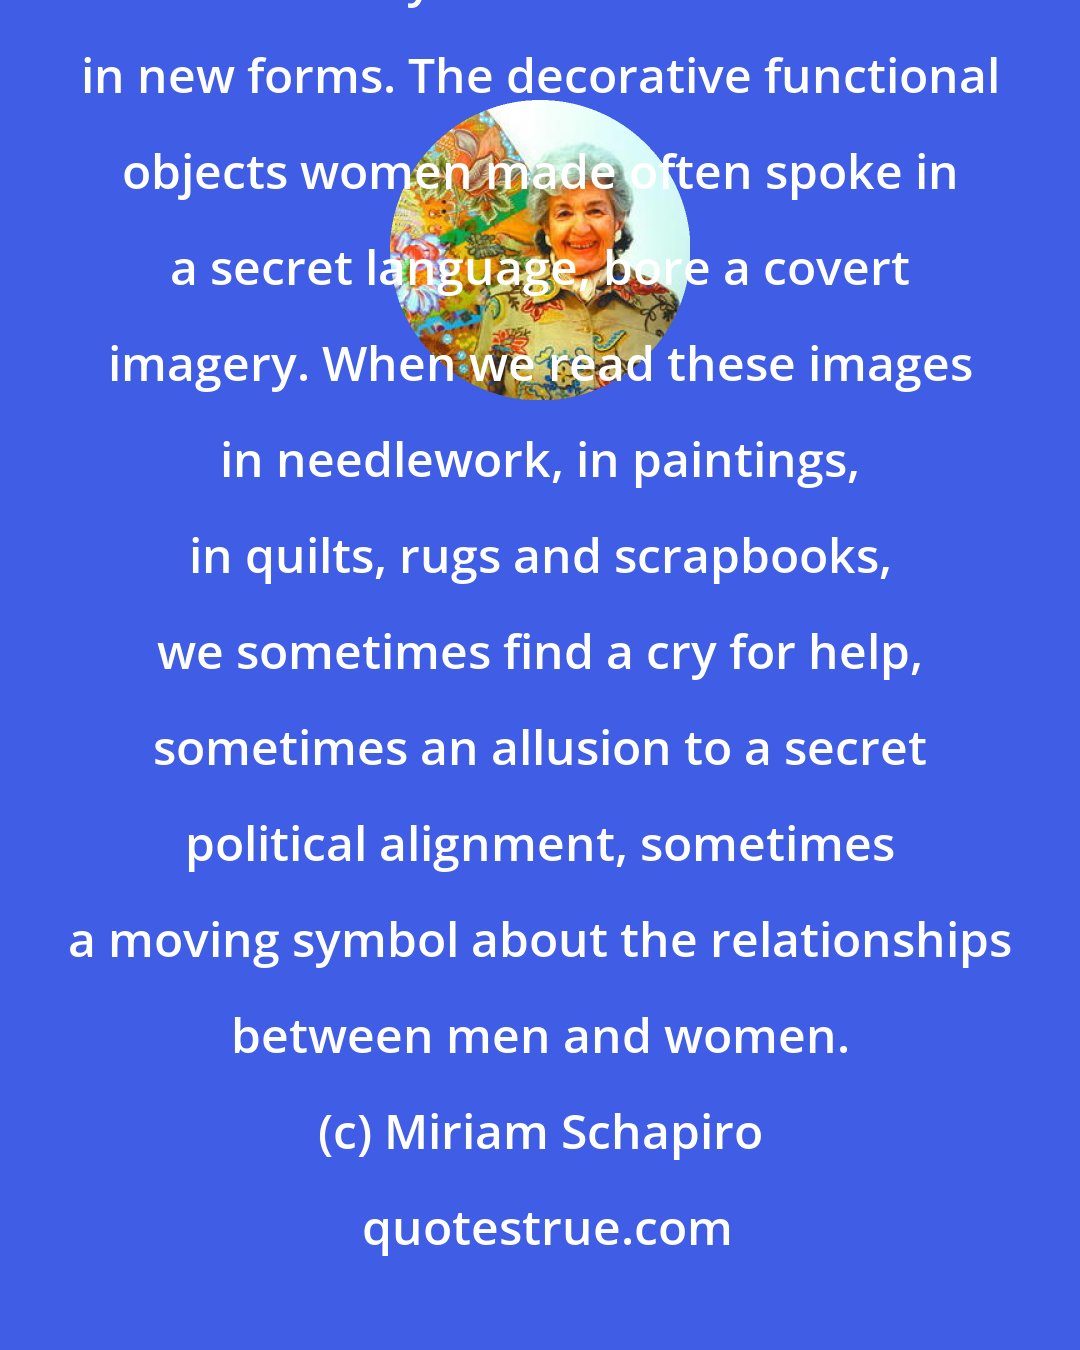 Miriam Schapiro: Women have always collected things and saved and recycled them because leftovers yielded nourishment in new forms. The decorative functional objects women made often spoke in a secret language, bore a covert imagery. When we read these images in needlework, in paintings, in quilts, rugs and scrapbooks, we sometimes find a cry for help, sometimes an allusion to a secret political alignment, sometimes a moving symbol about the relationships between men and women.